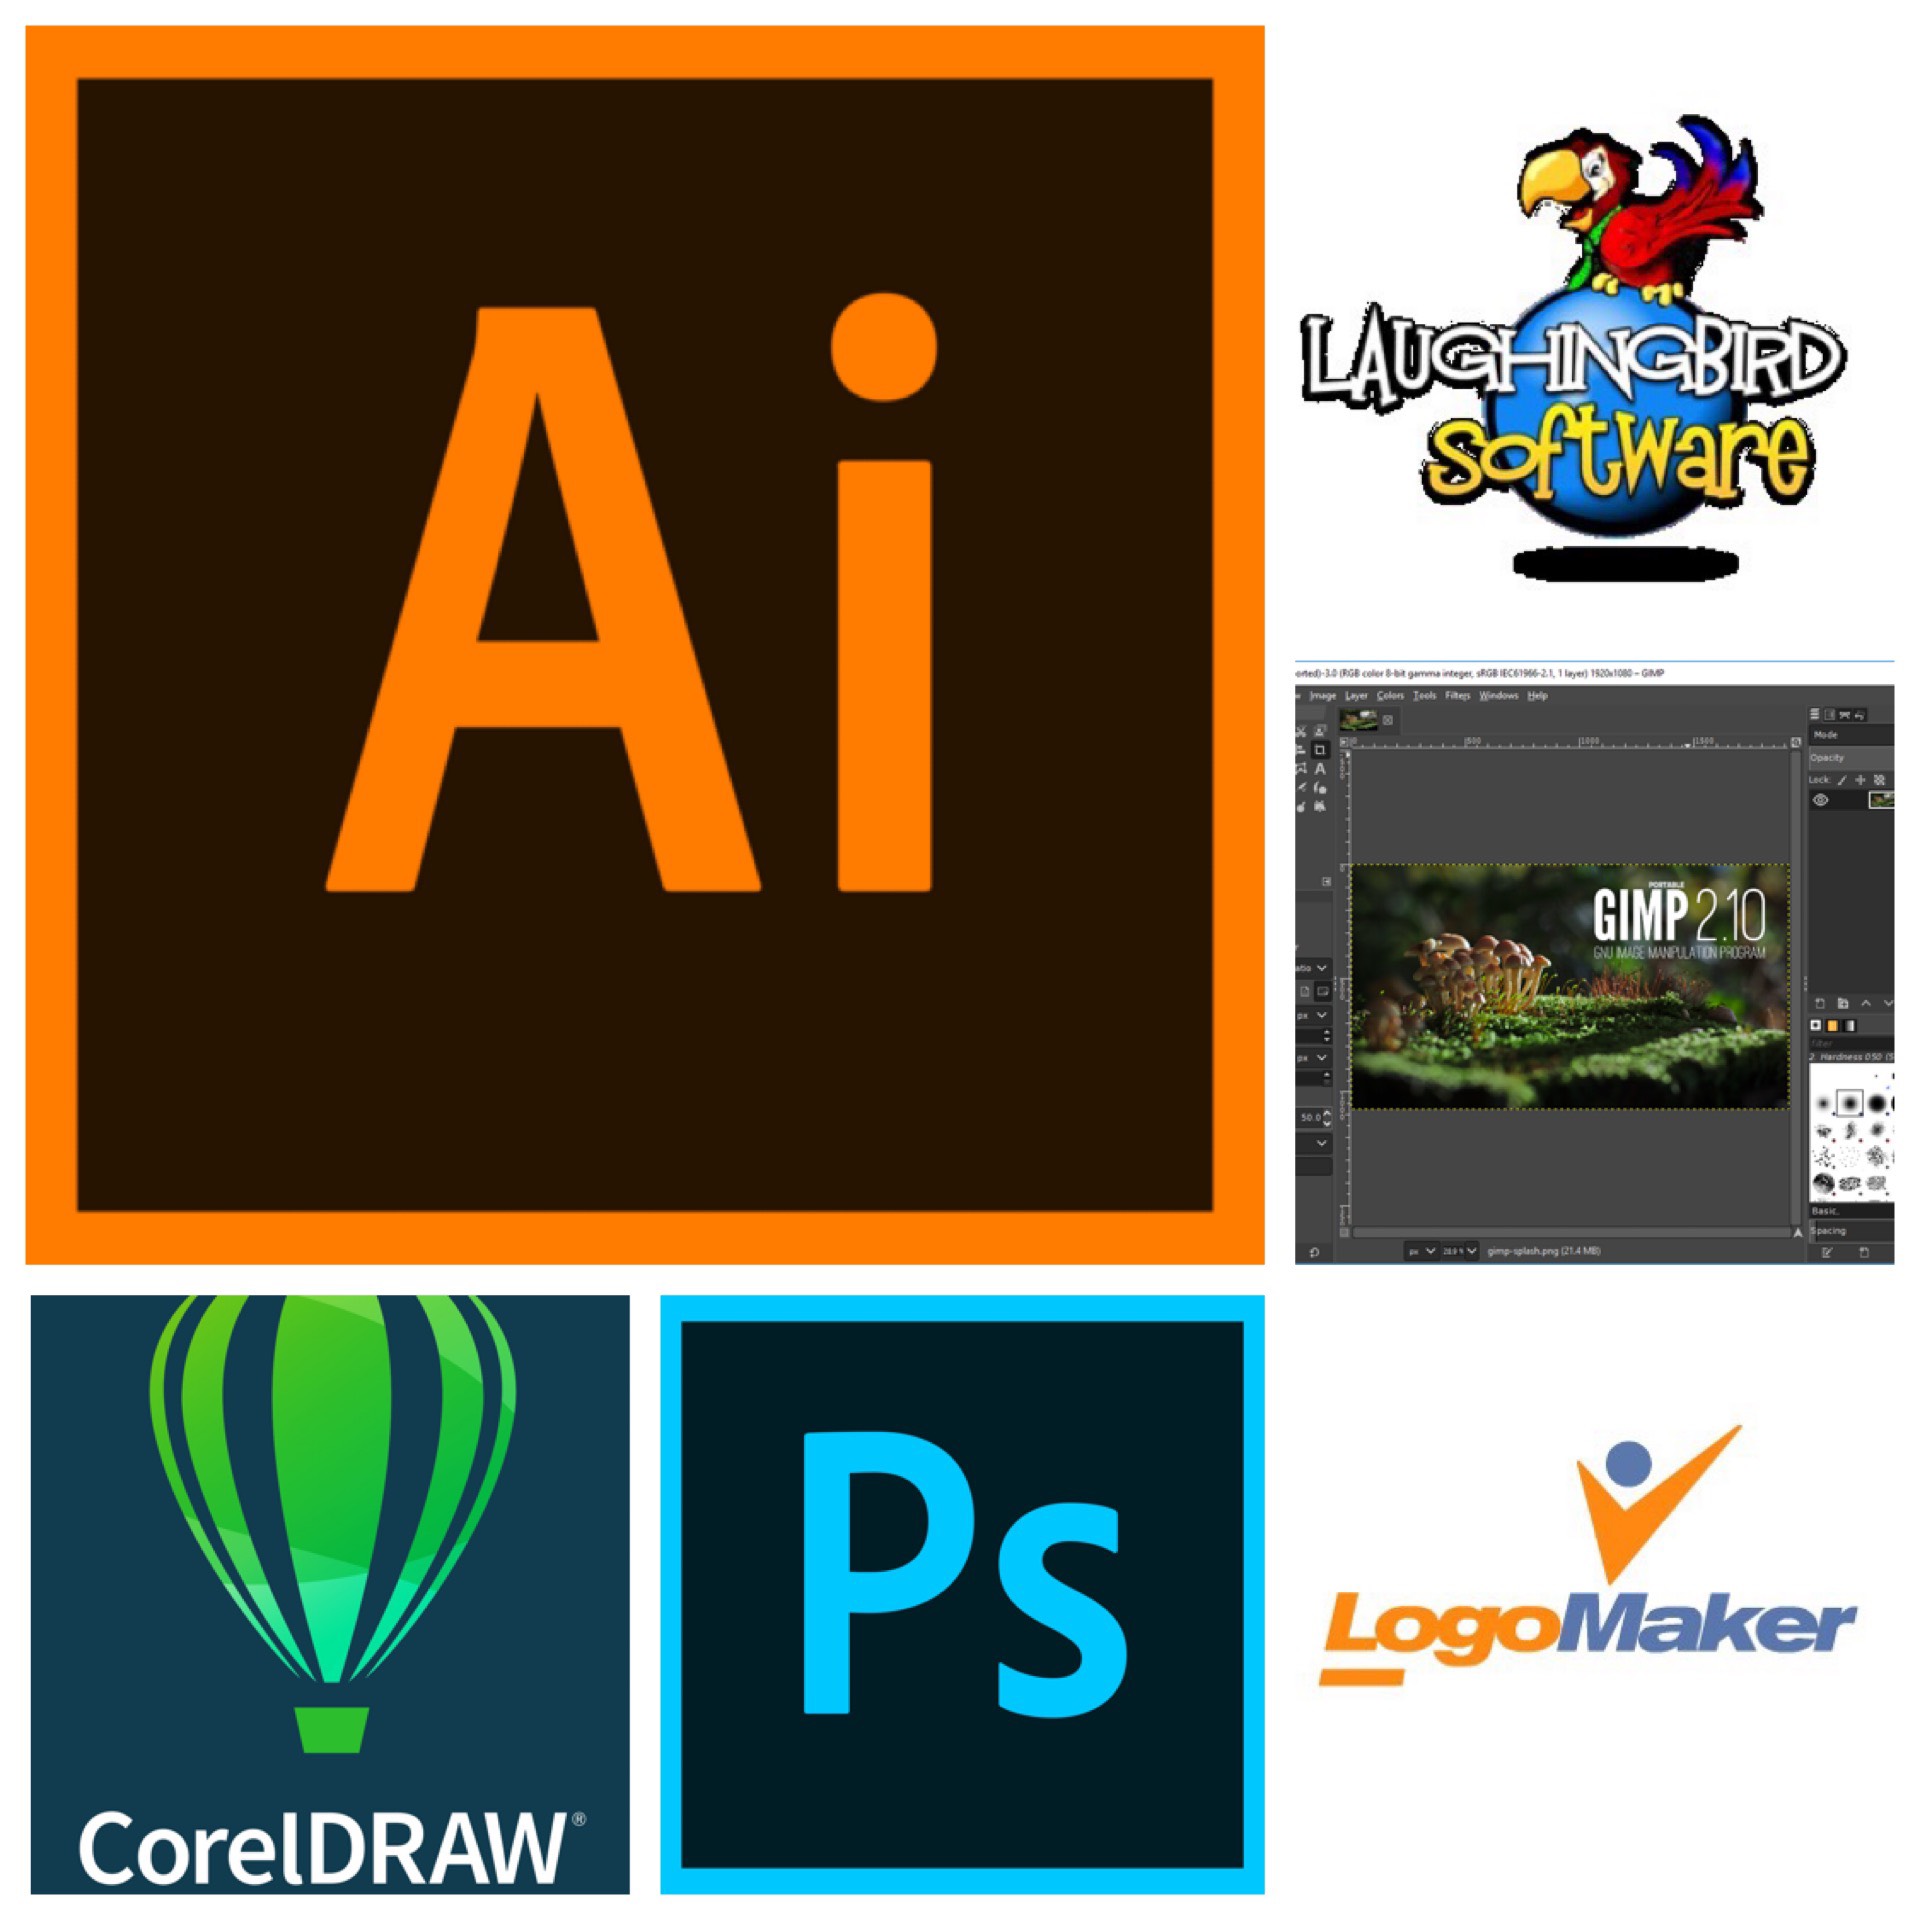 Pros & Cons of CorelDraw that Mostly Designers Might Not Know